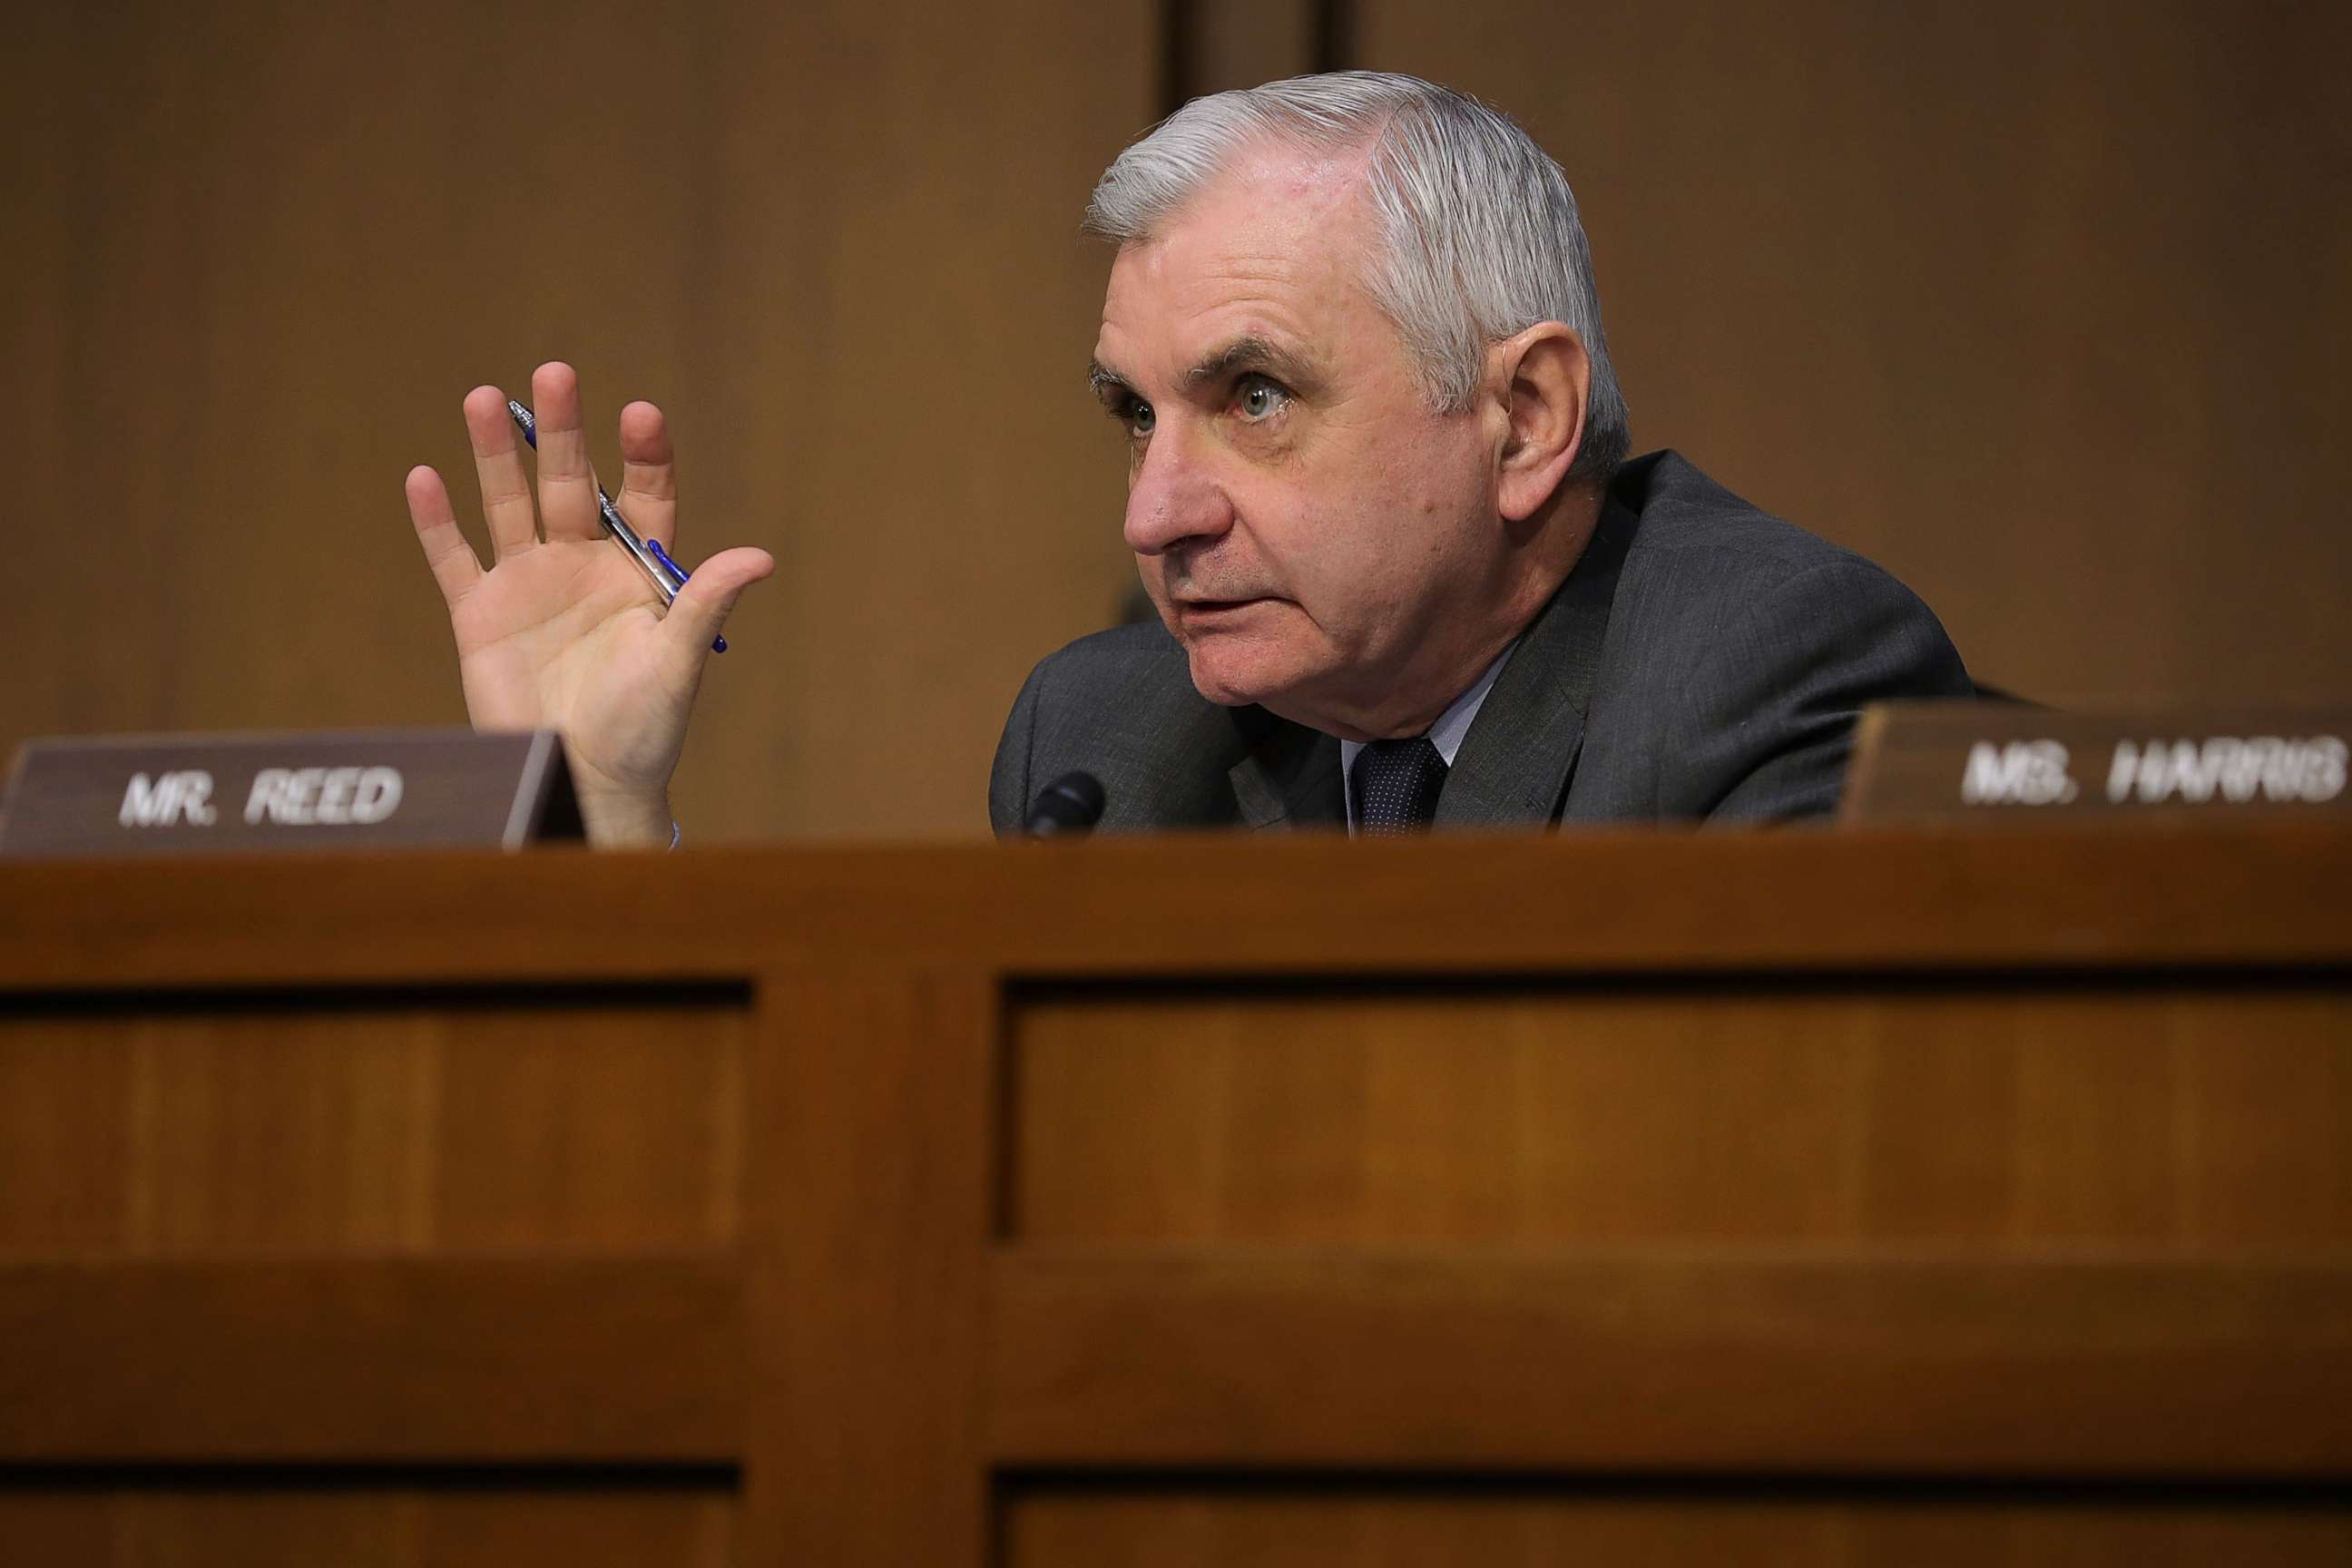 PHOTO: Senate Intelligence Committee member Sen. Jack Reed (D-RI) questions intelligence officials, including the heads of the FBI, CIA and NSA, during a hearing in the Hart Senate Office Building on Capitol Hill, Feb. 13, 2018, in Washington.